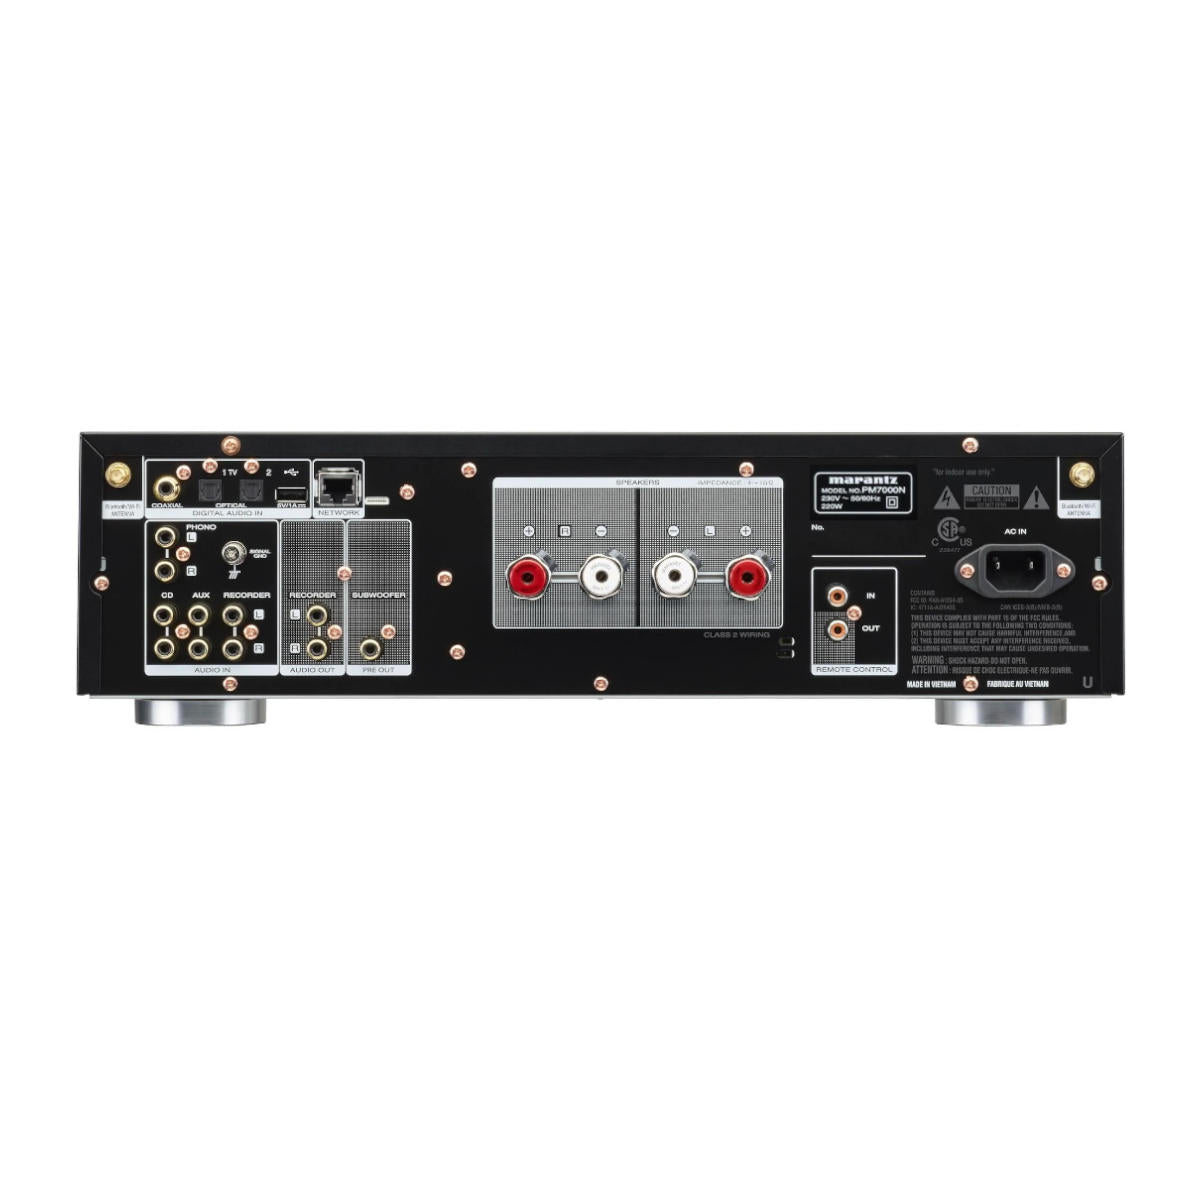 Marantz PM7000N Integrated Stereo Amplifier - Rear View